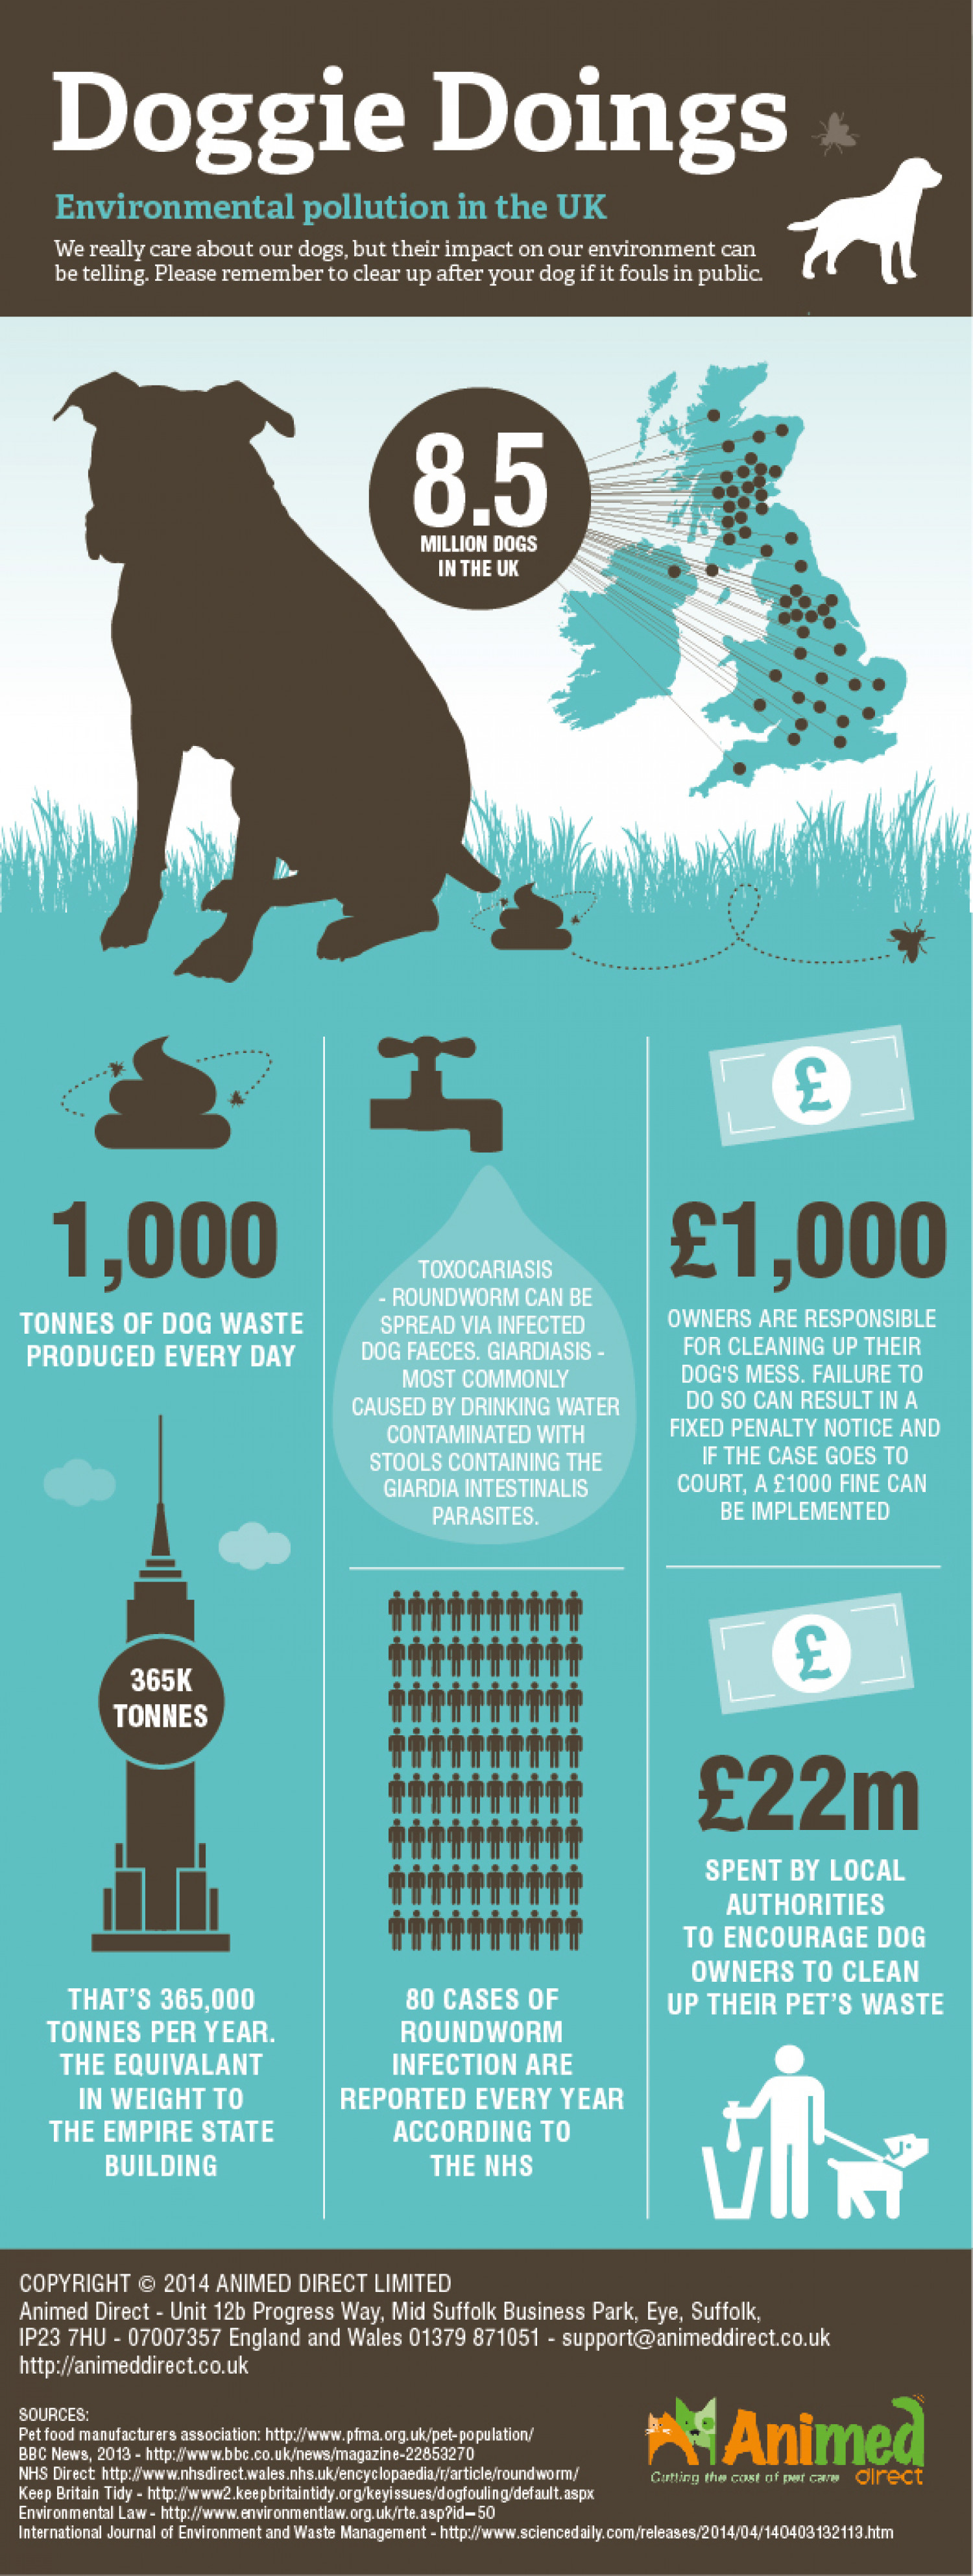 Doggie Doings: Environmental Pollution in the UK Infographic